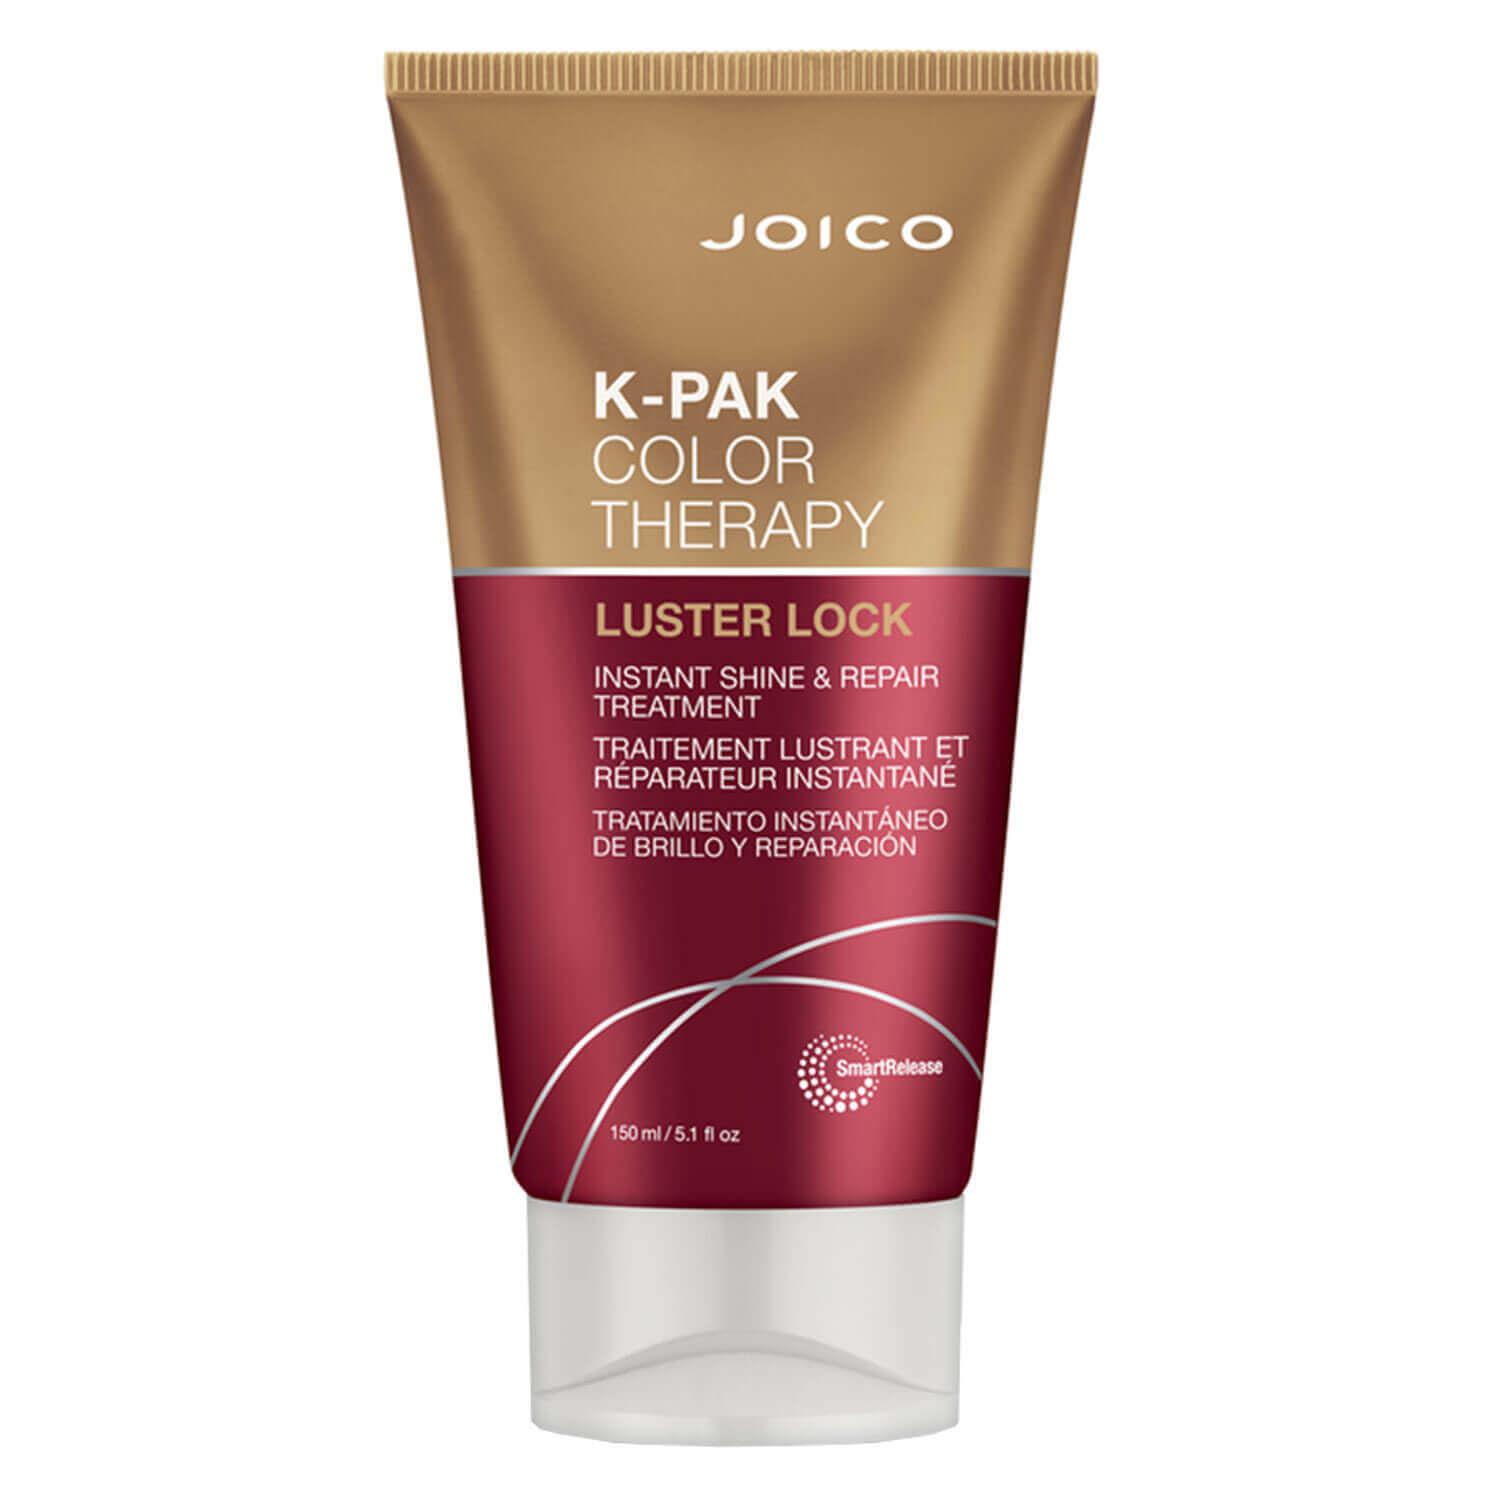 K-Pak - Color Therapy Luster Lock Instant Shine & Repair Treatment